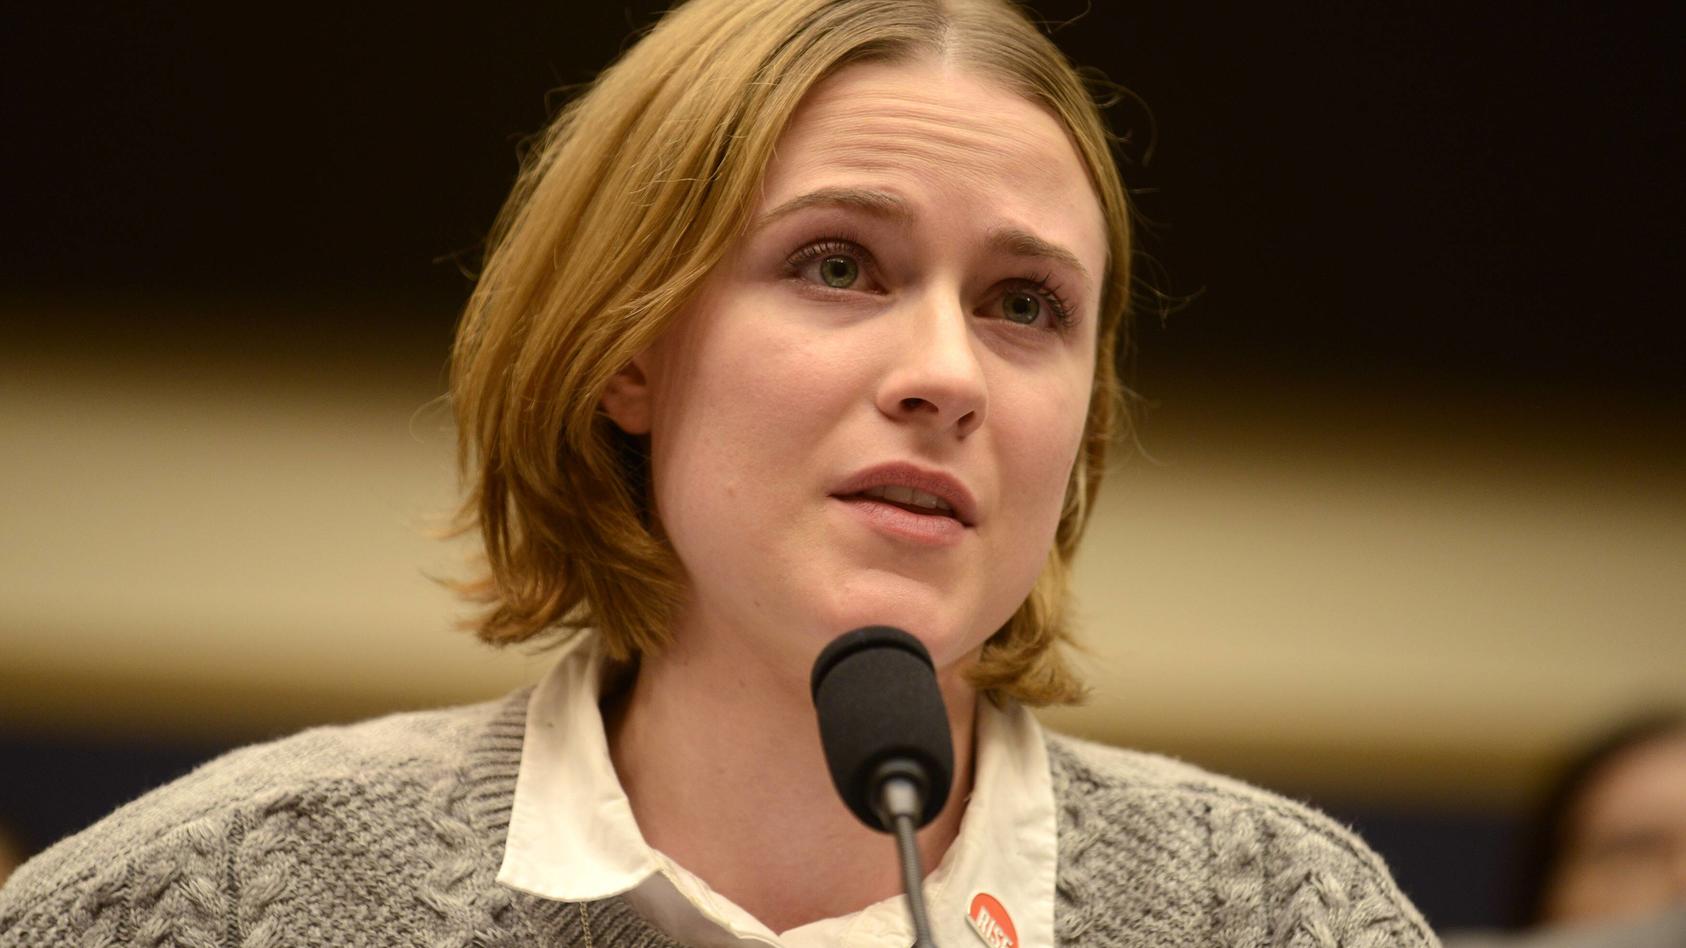 Evan Rachel Wood bei Anhörung zu sexuellen Übergriffen Actress, rape survivor and advocate Evan Rachel Wood makes remarks as she testifies before the House Subcommittee on Crime, Terrorism, Homeland Security and Investigations hearing, February 27, 2